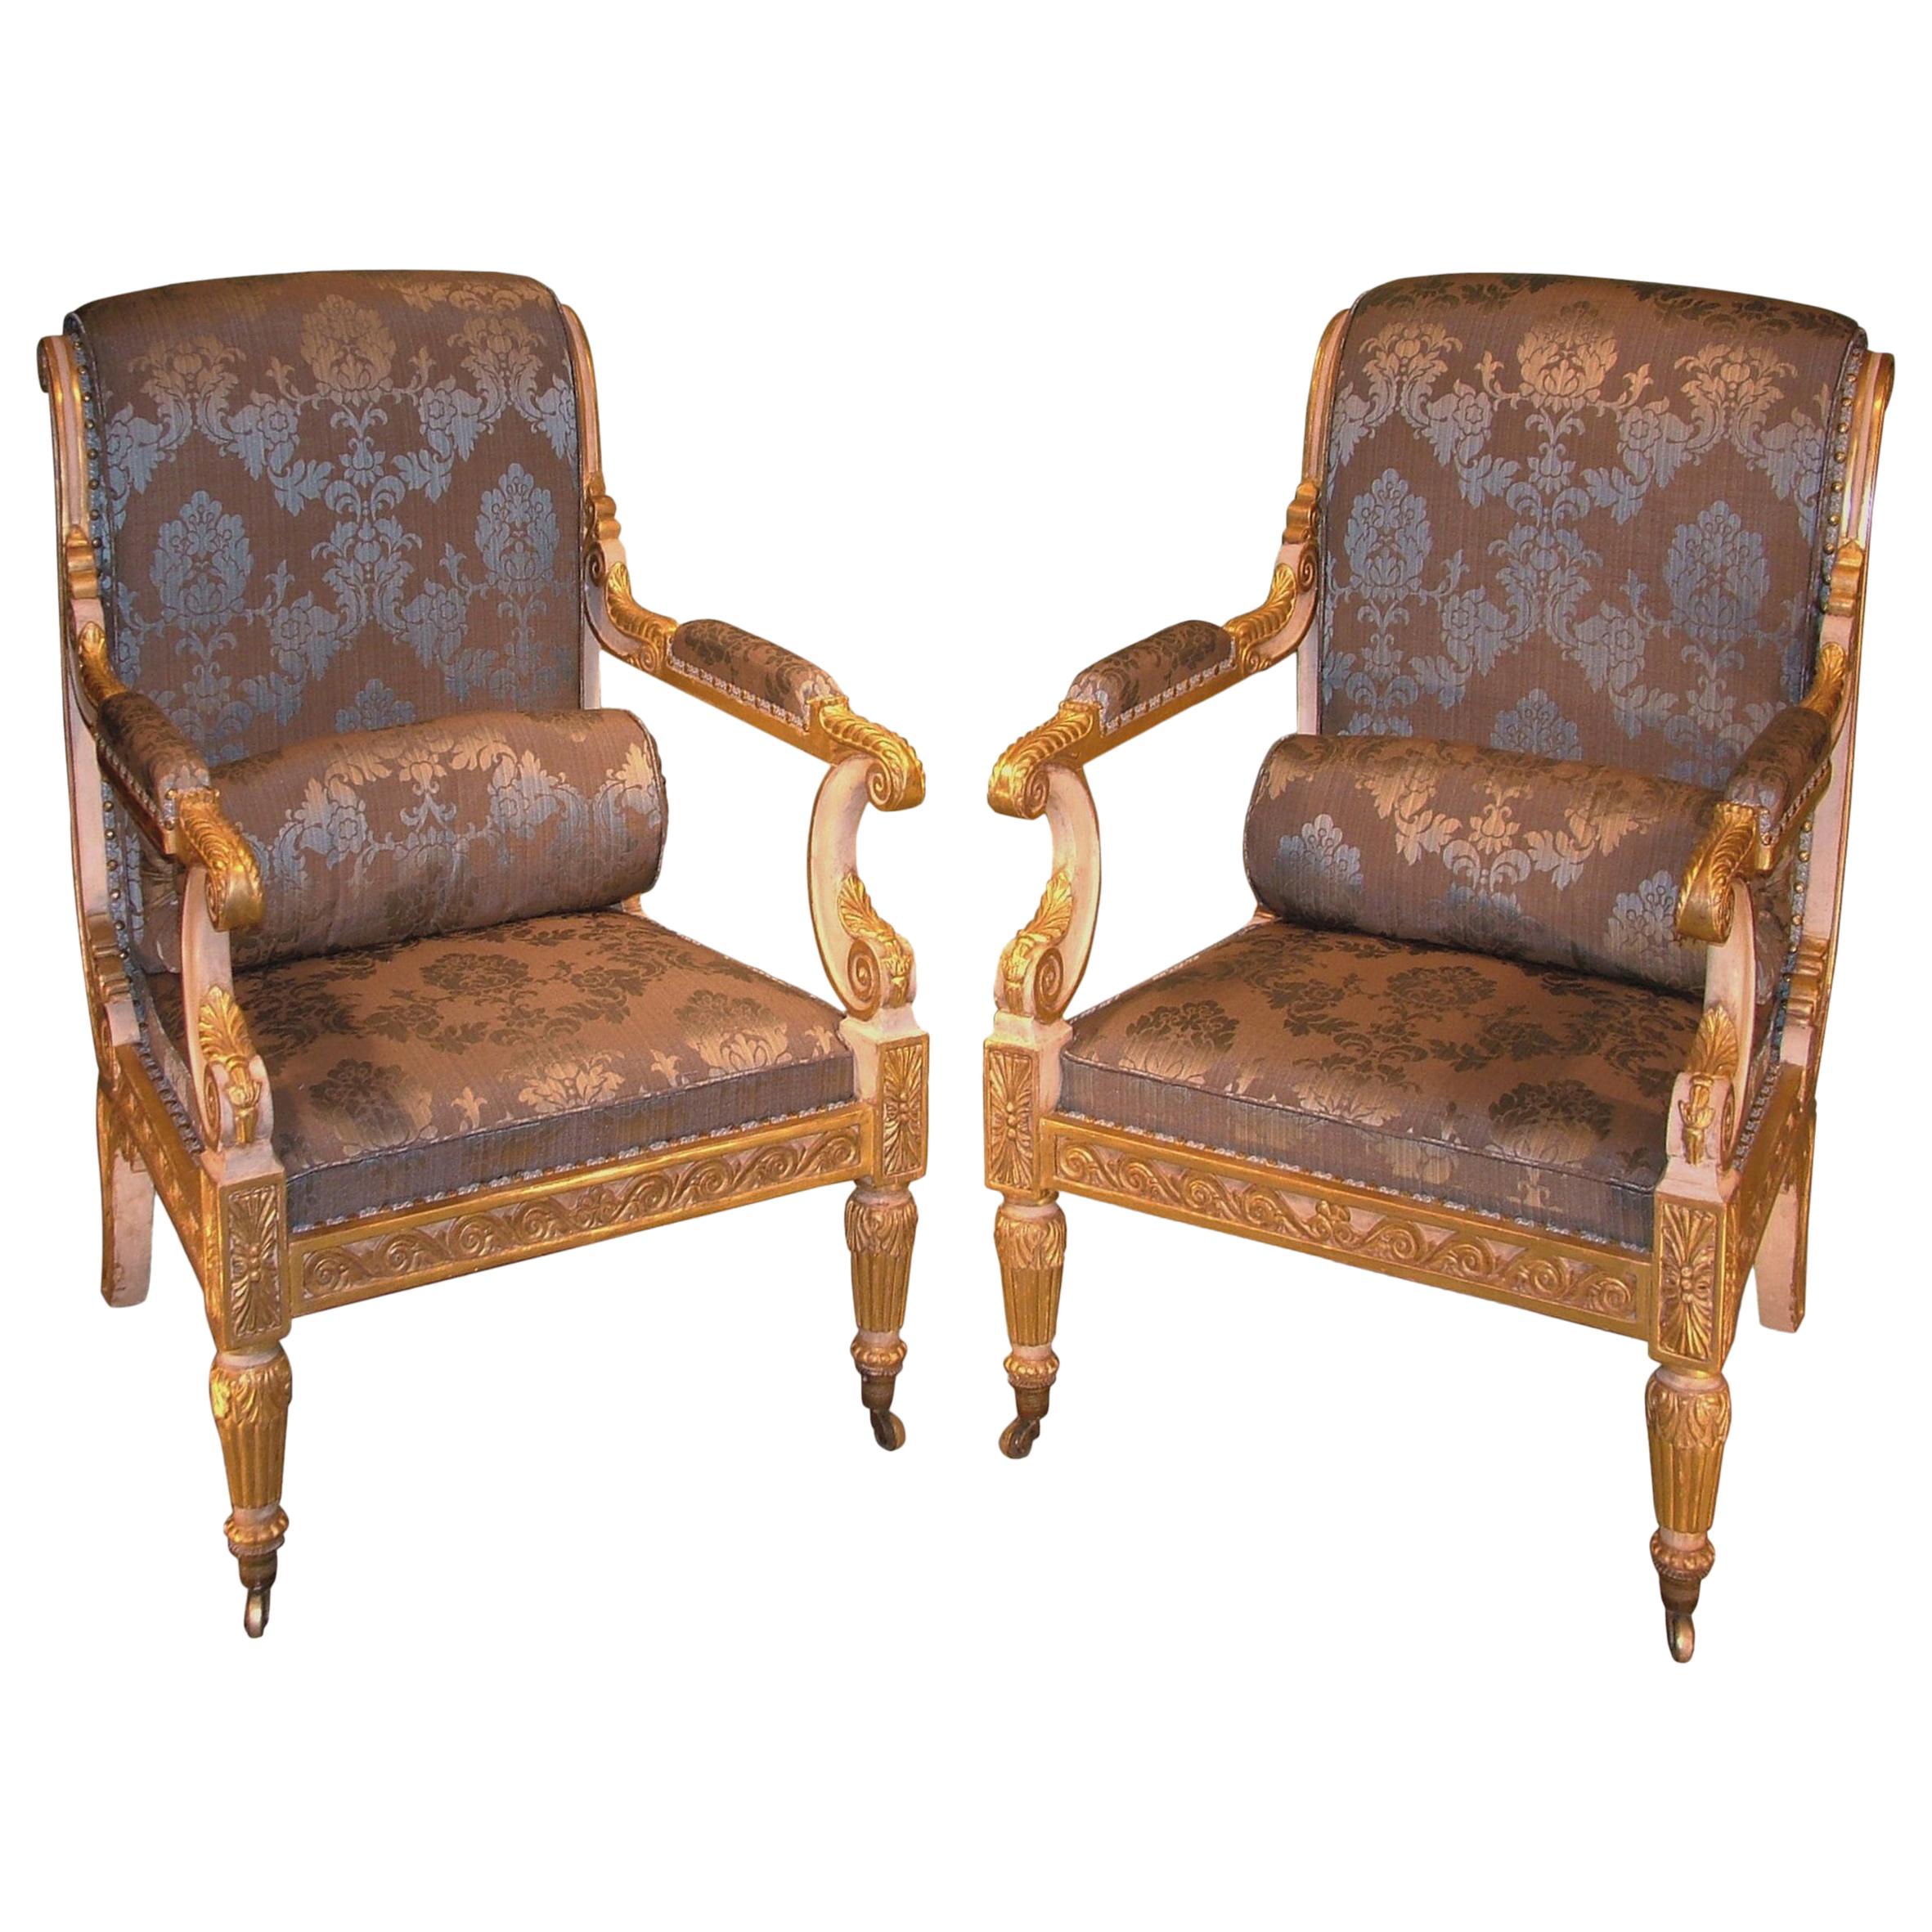 Pair of Regency Period White Painted and Giltwood Armchairs For Sale